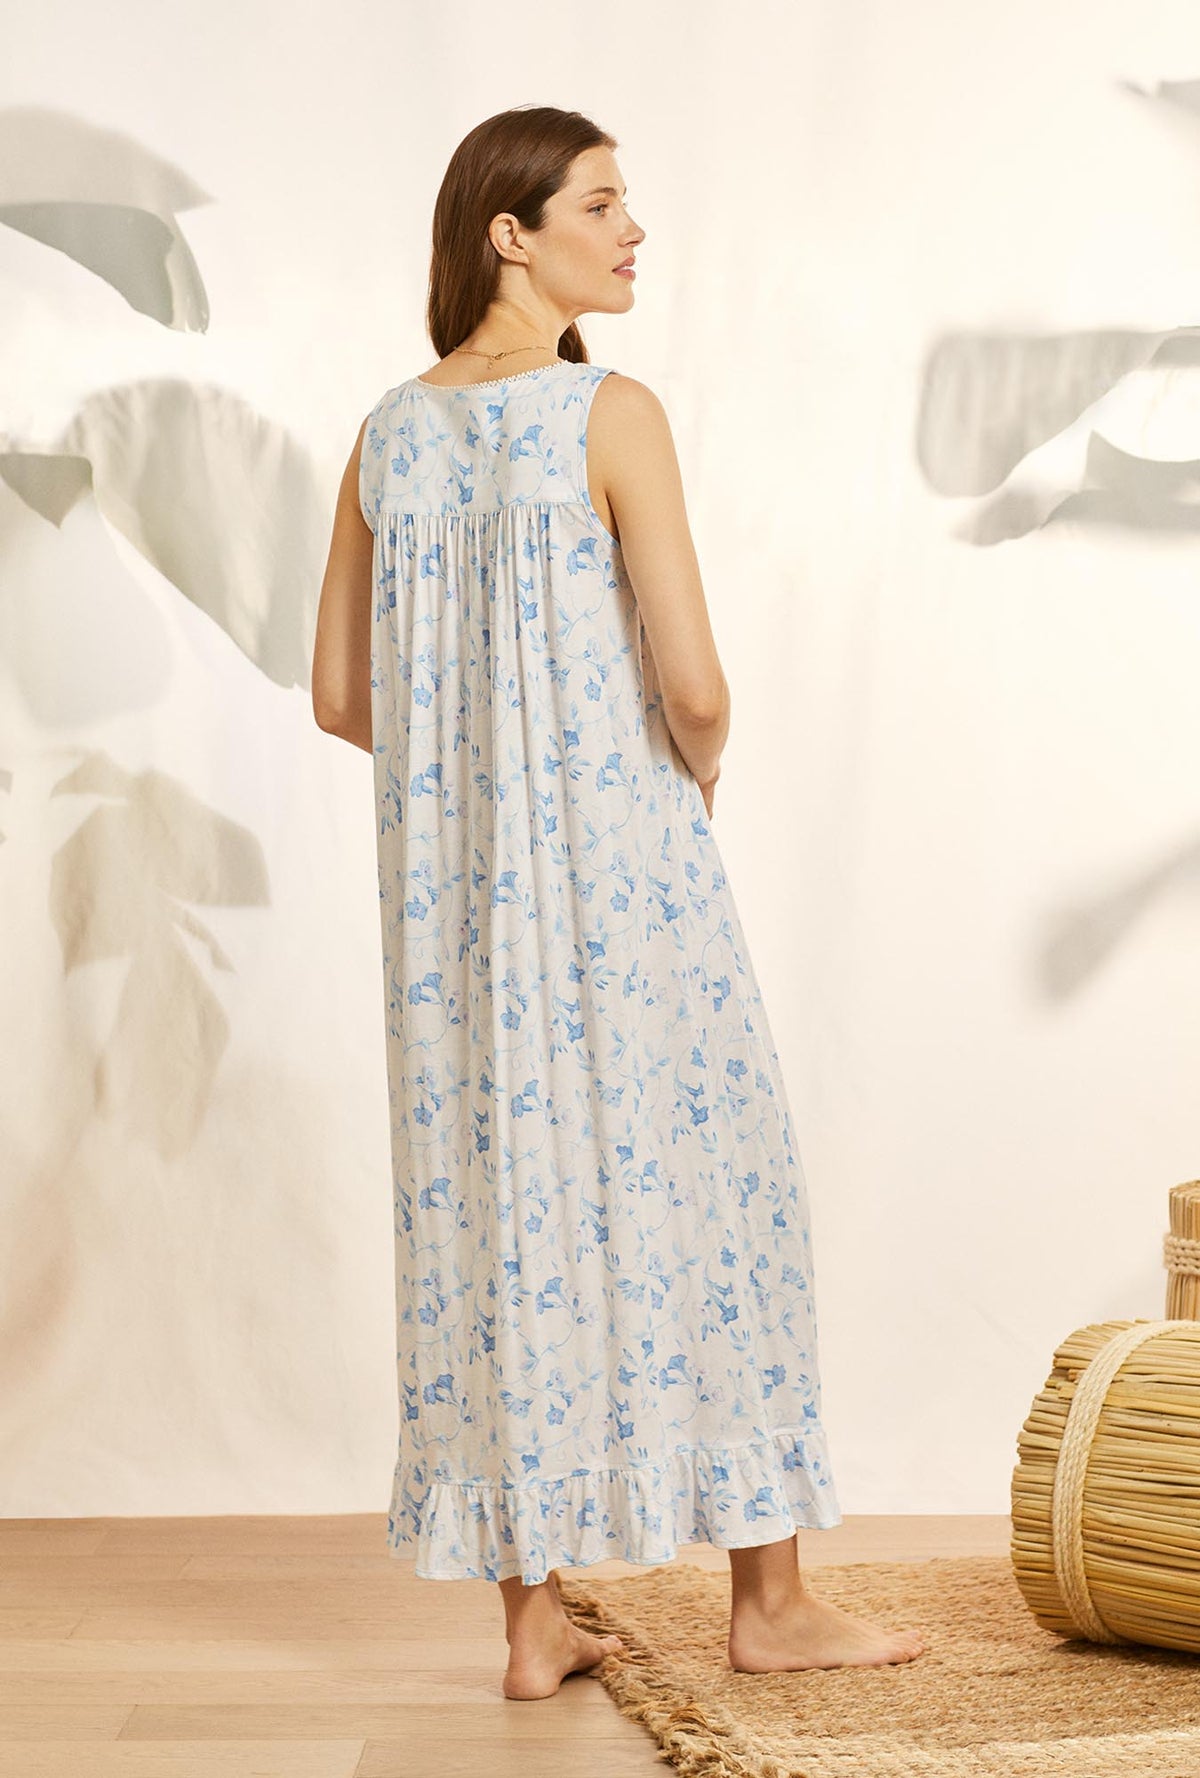 A lady wearing blue knit eileen nightgown with morning glory print.